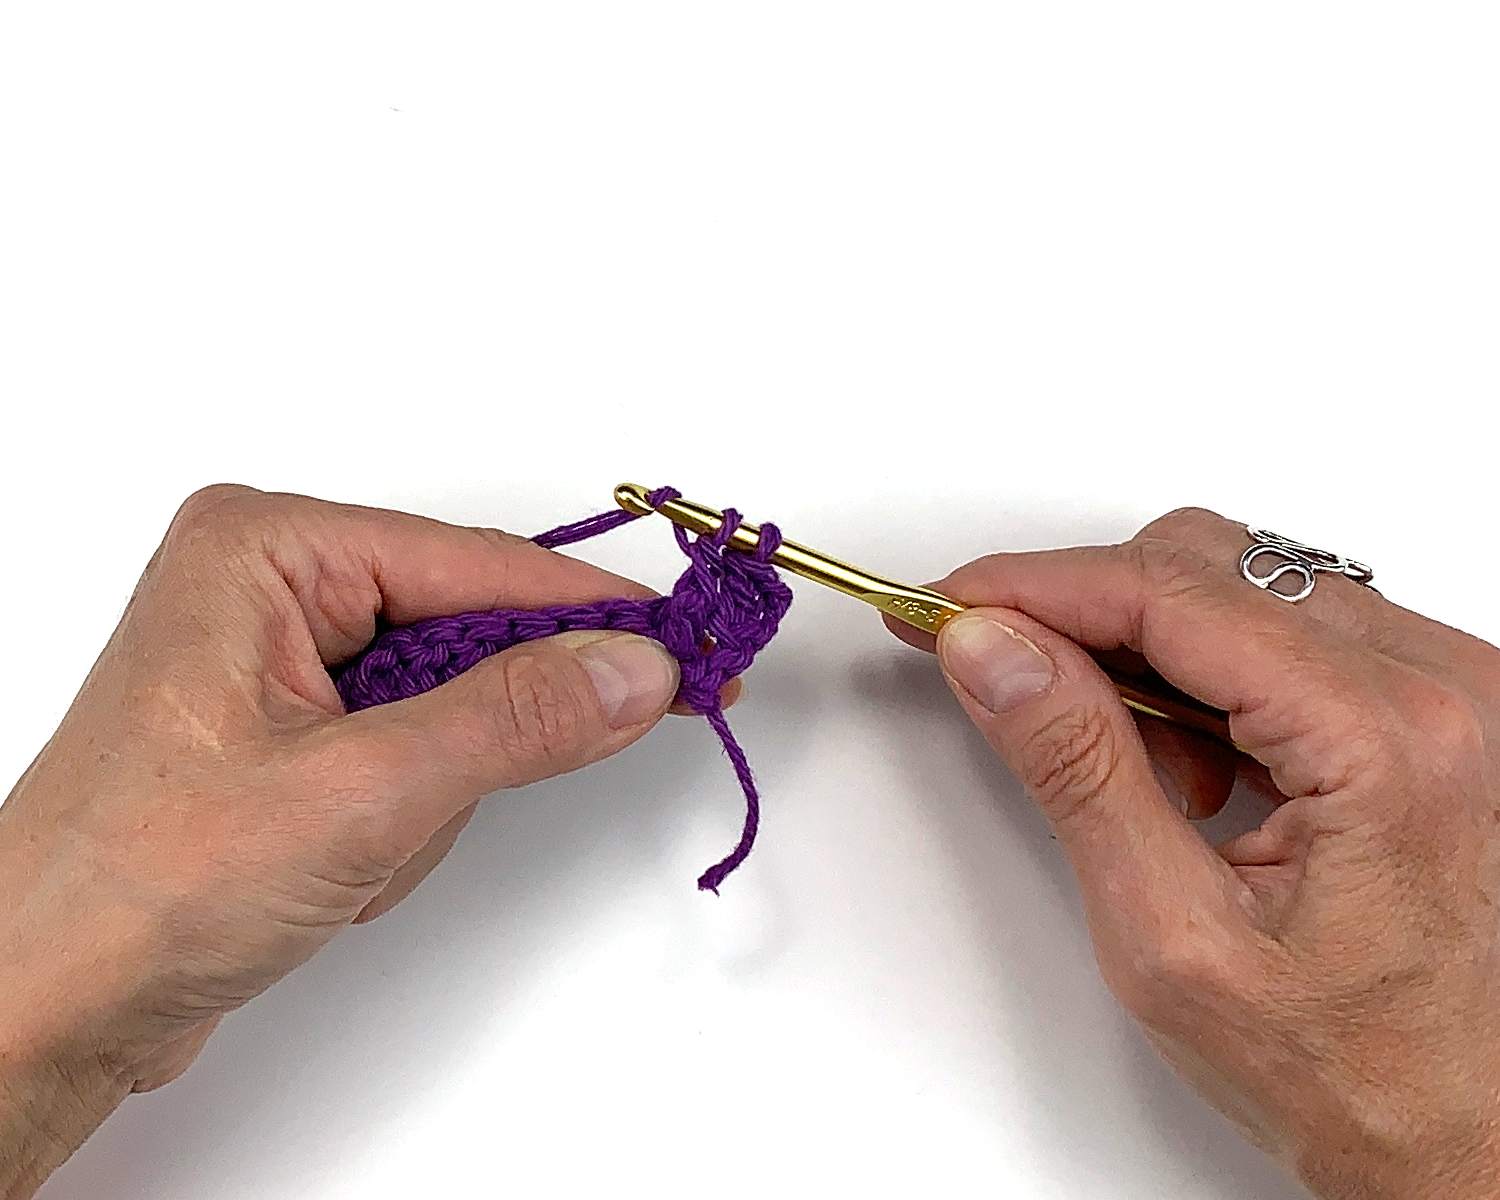 image of hands holding crochet work and doing a yarn over